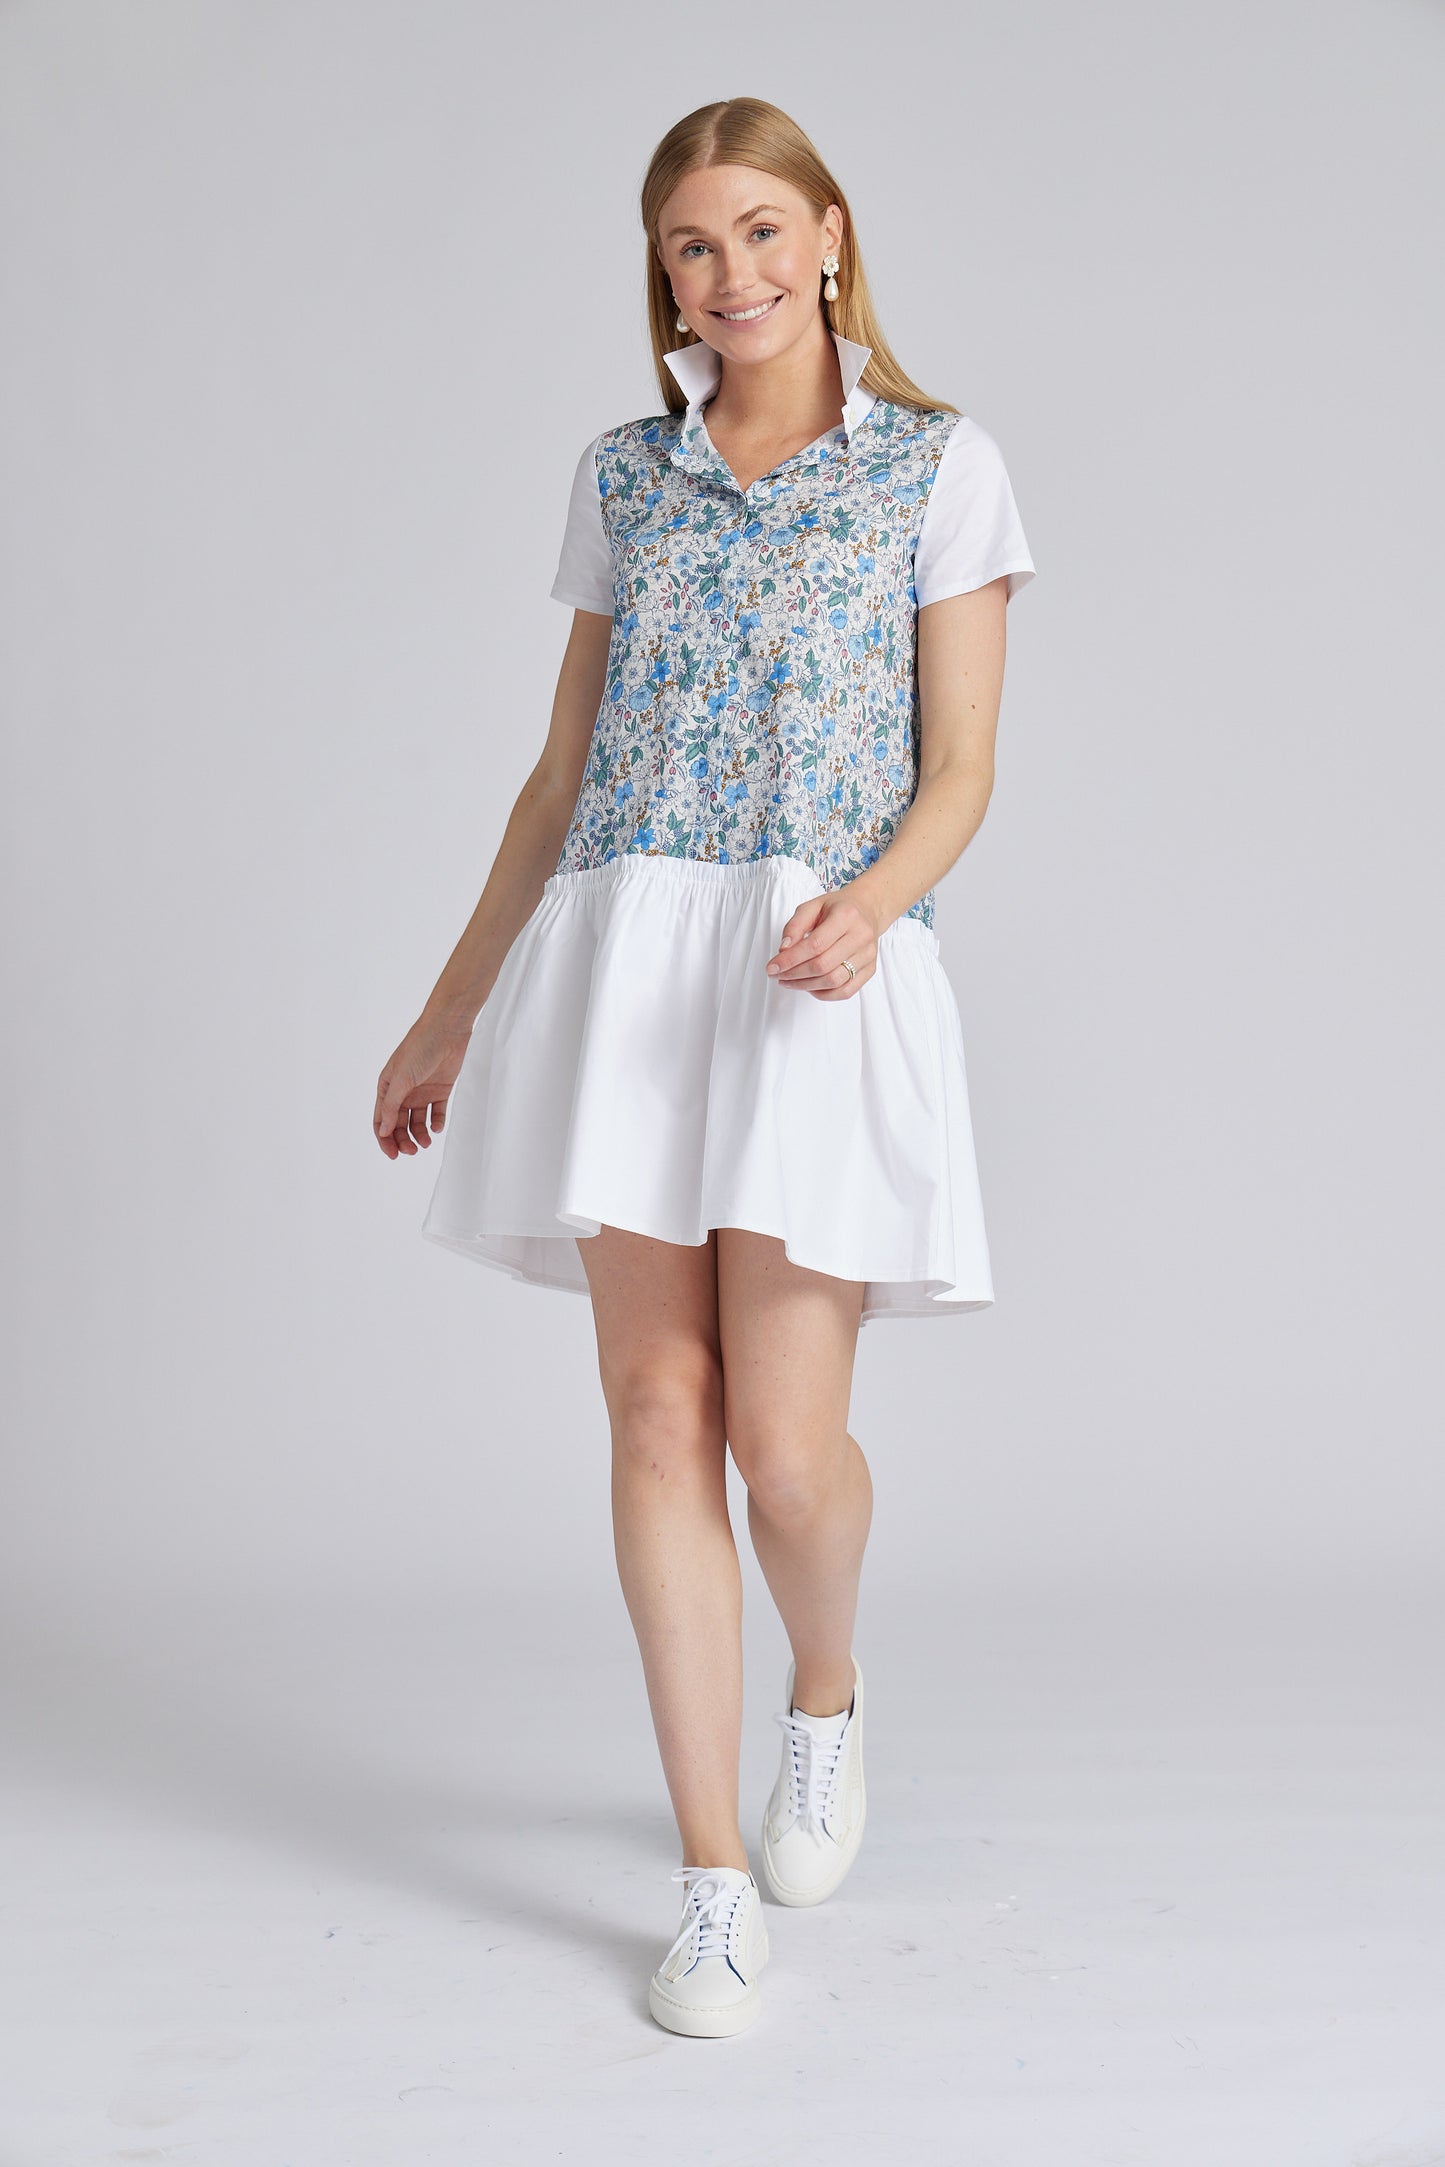 Claire Dress with Ruffle in Blue Floral & White